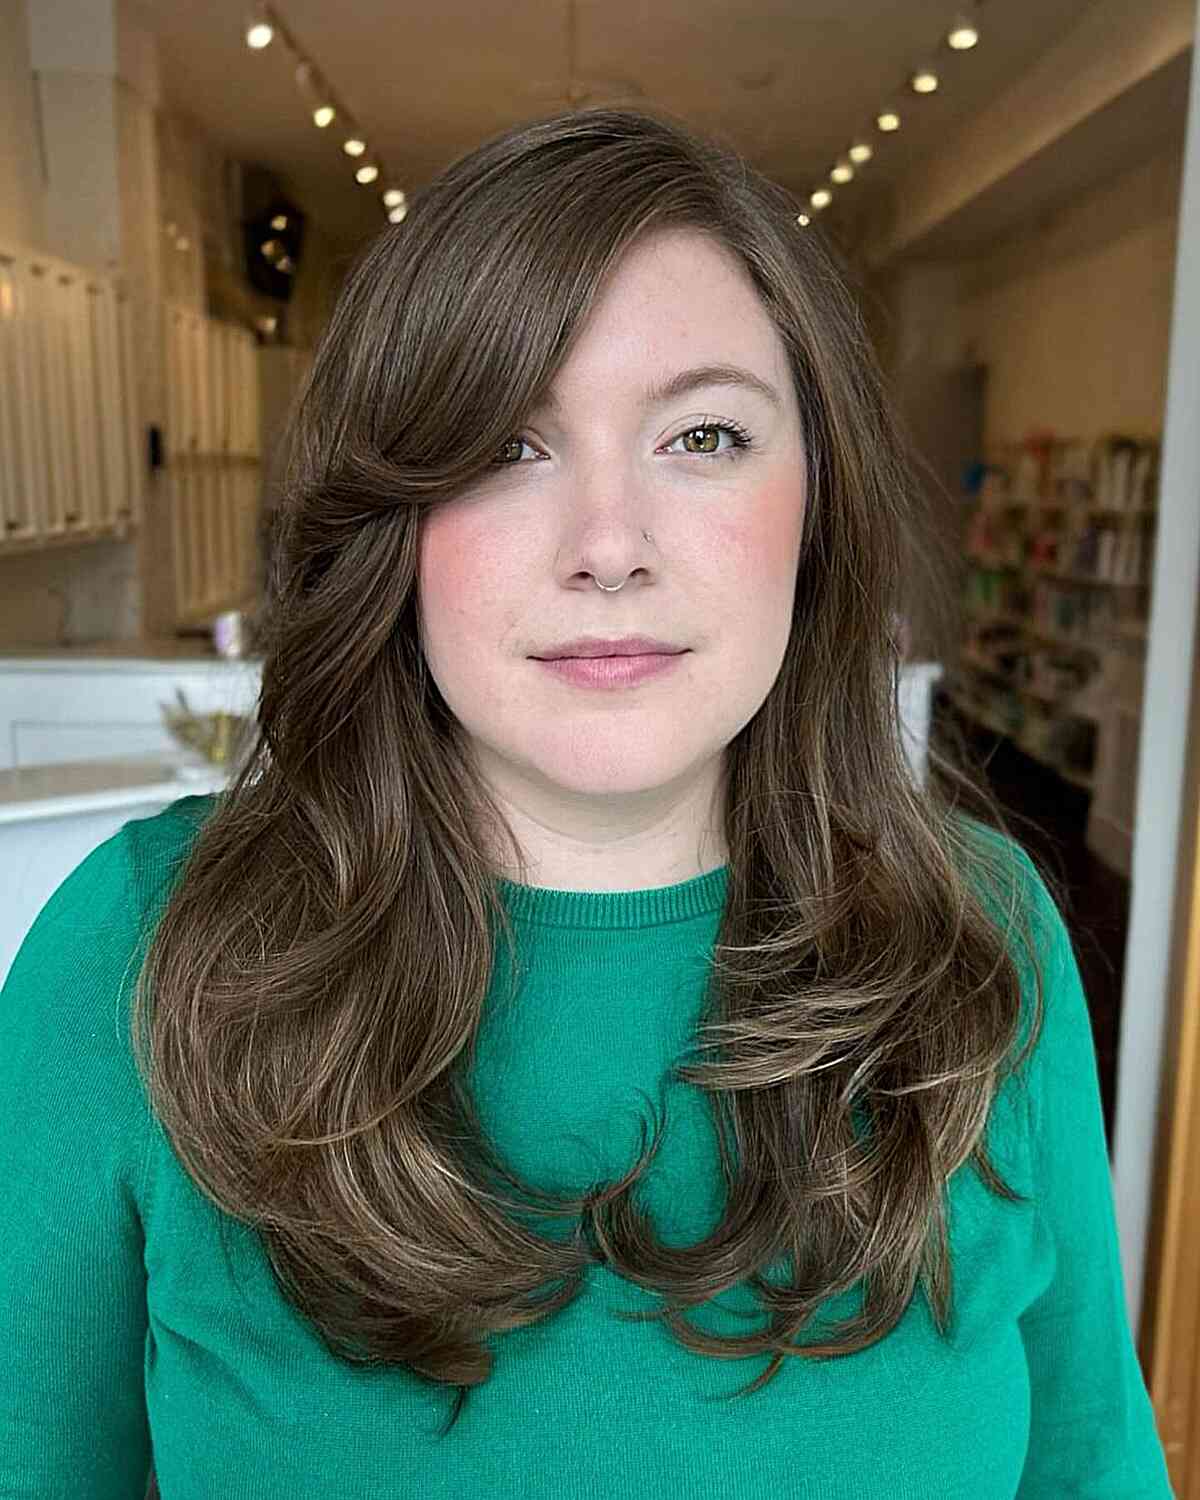 Rachel-Styled Long Hair with a Side Part